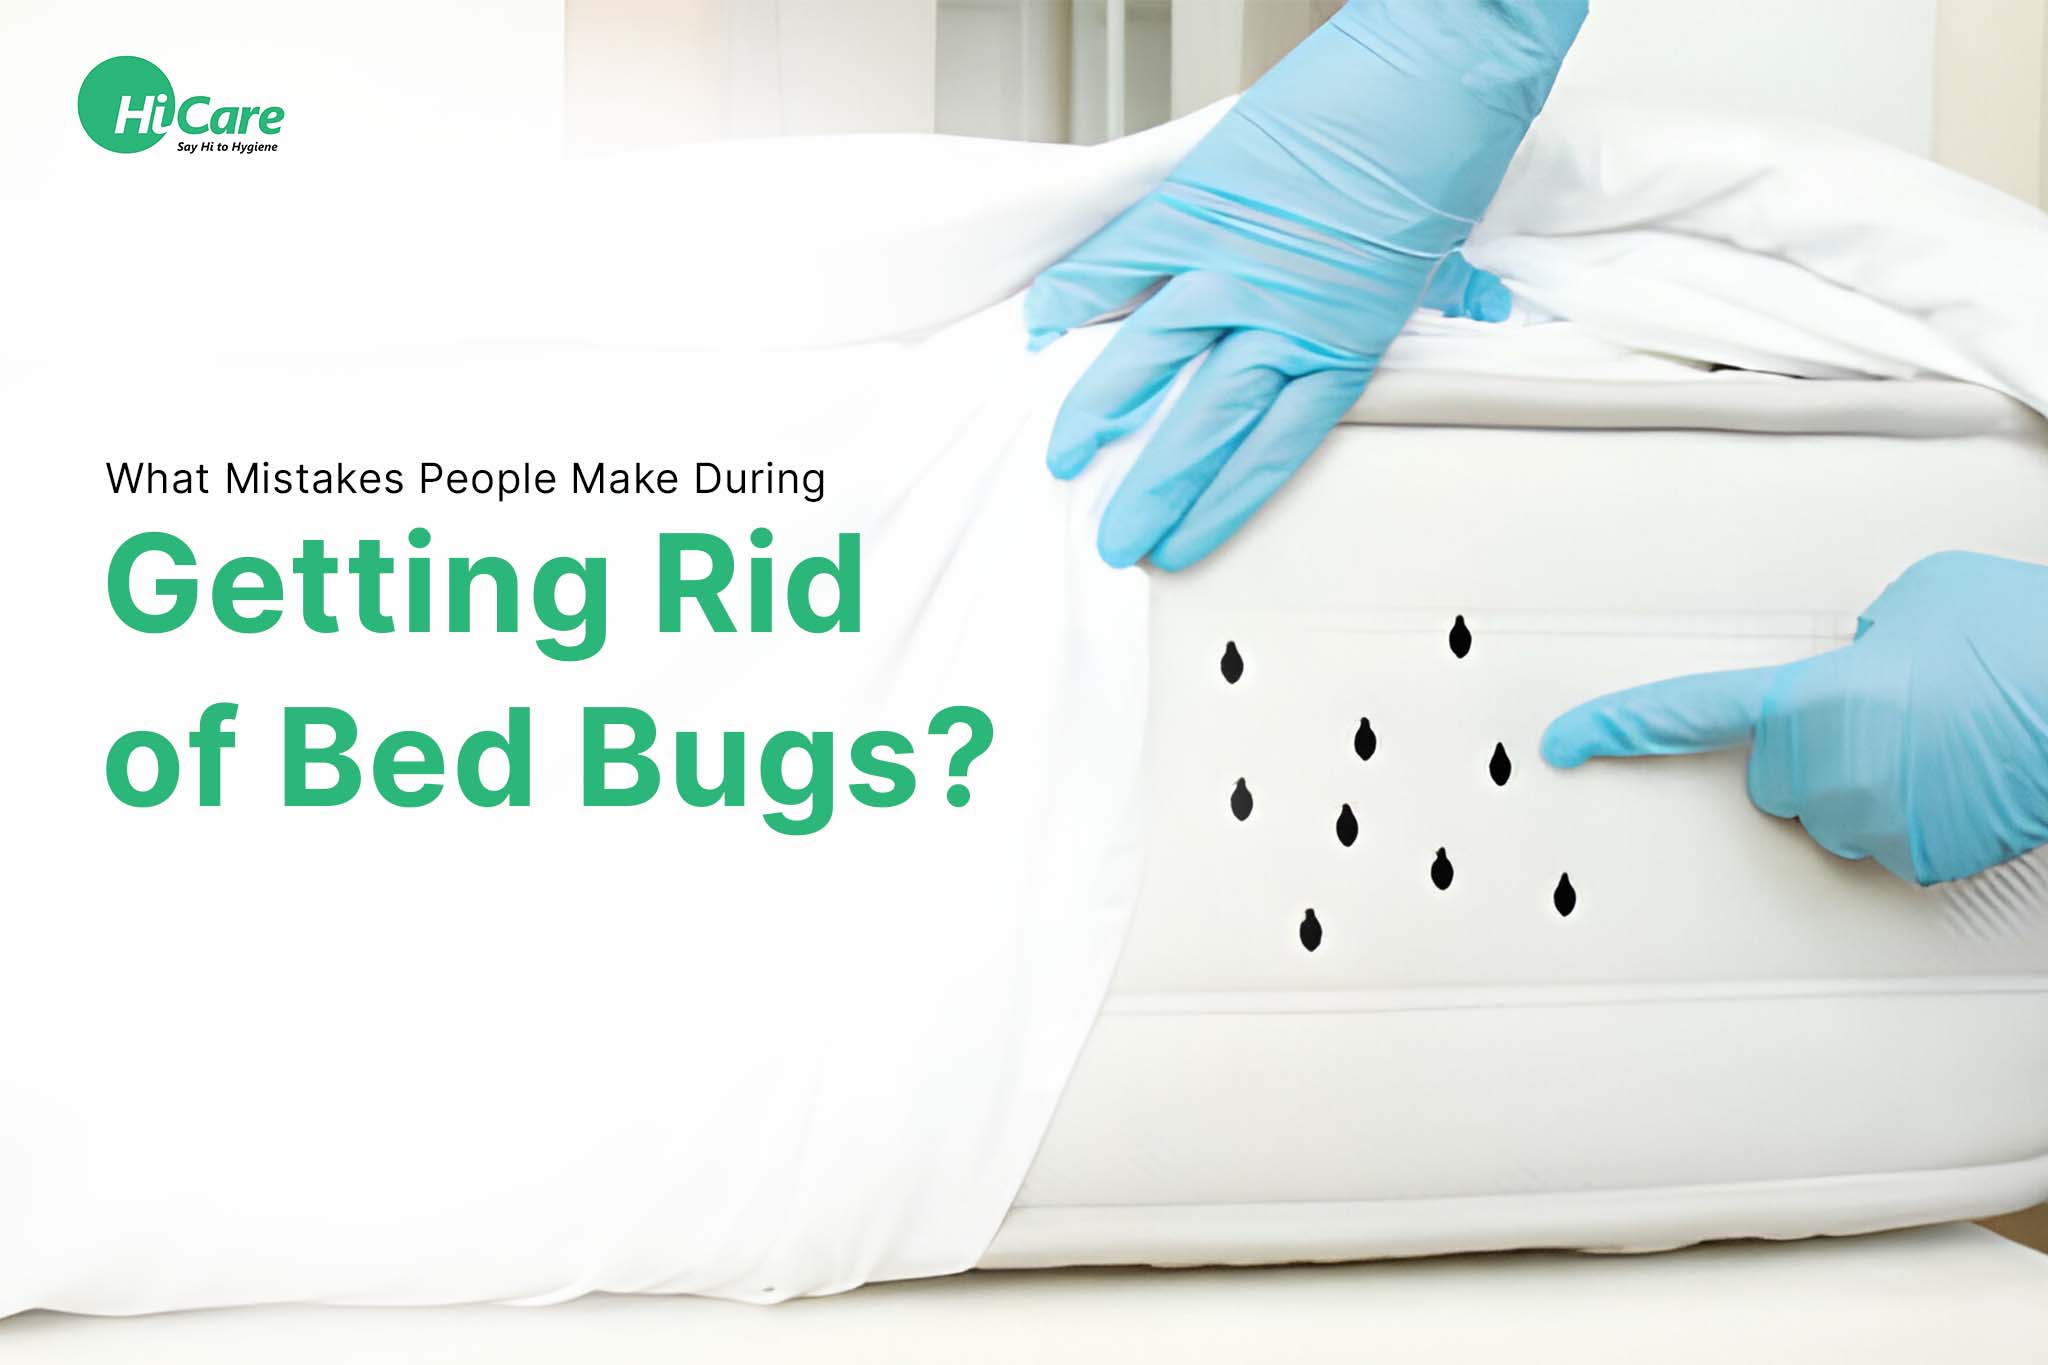 What Mistakes People Make During Getting Rid of Bed Bugs?